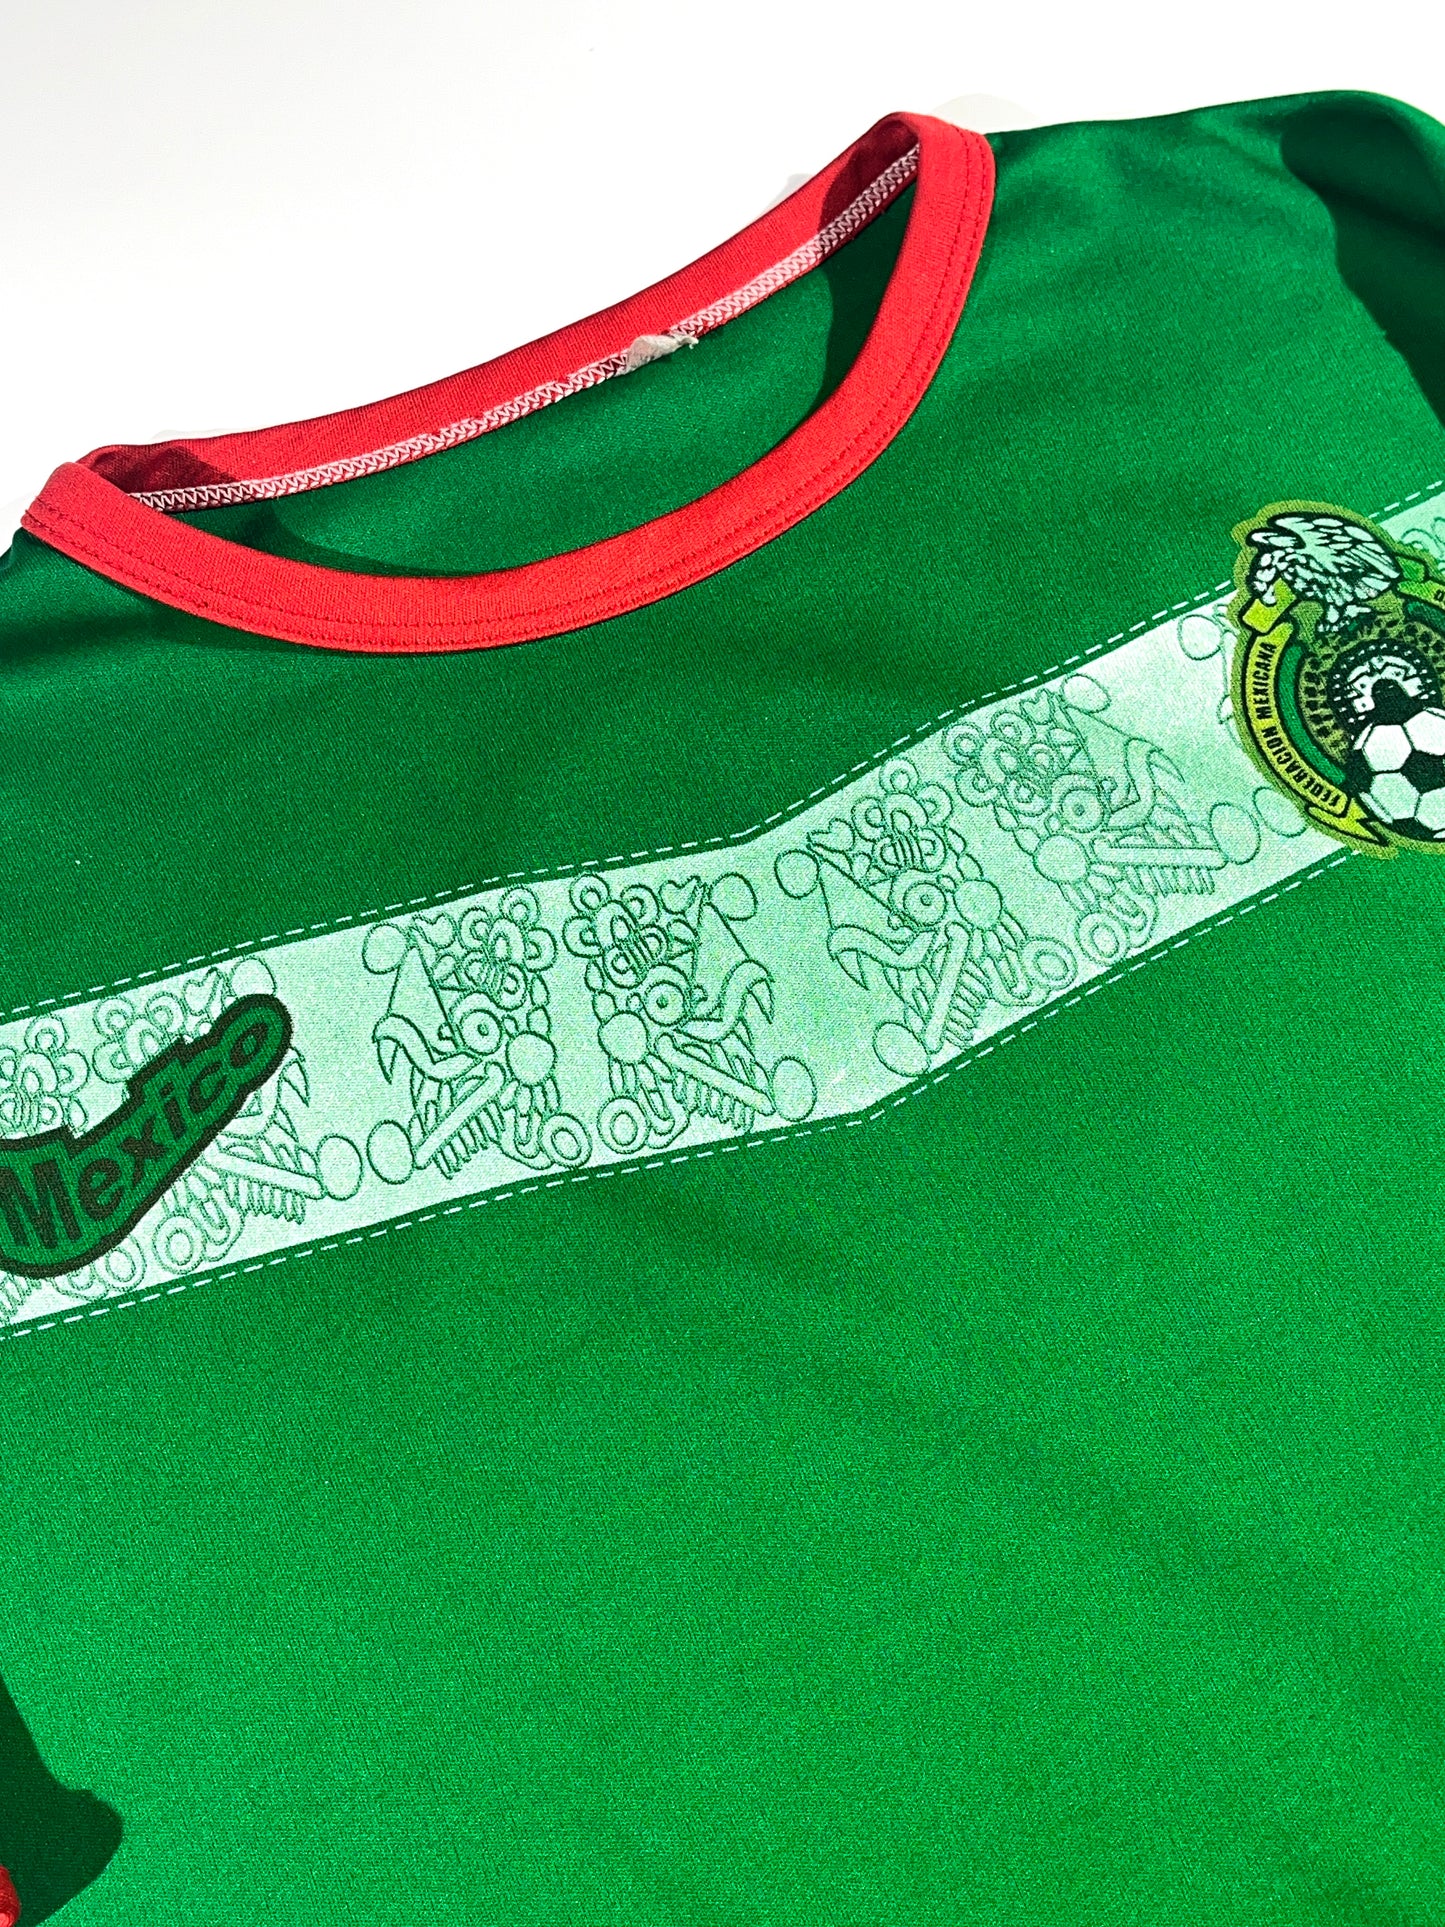 Vintage Mexico Soccer Jersey Fifa WC 2006